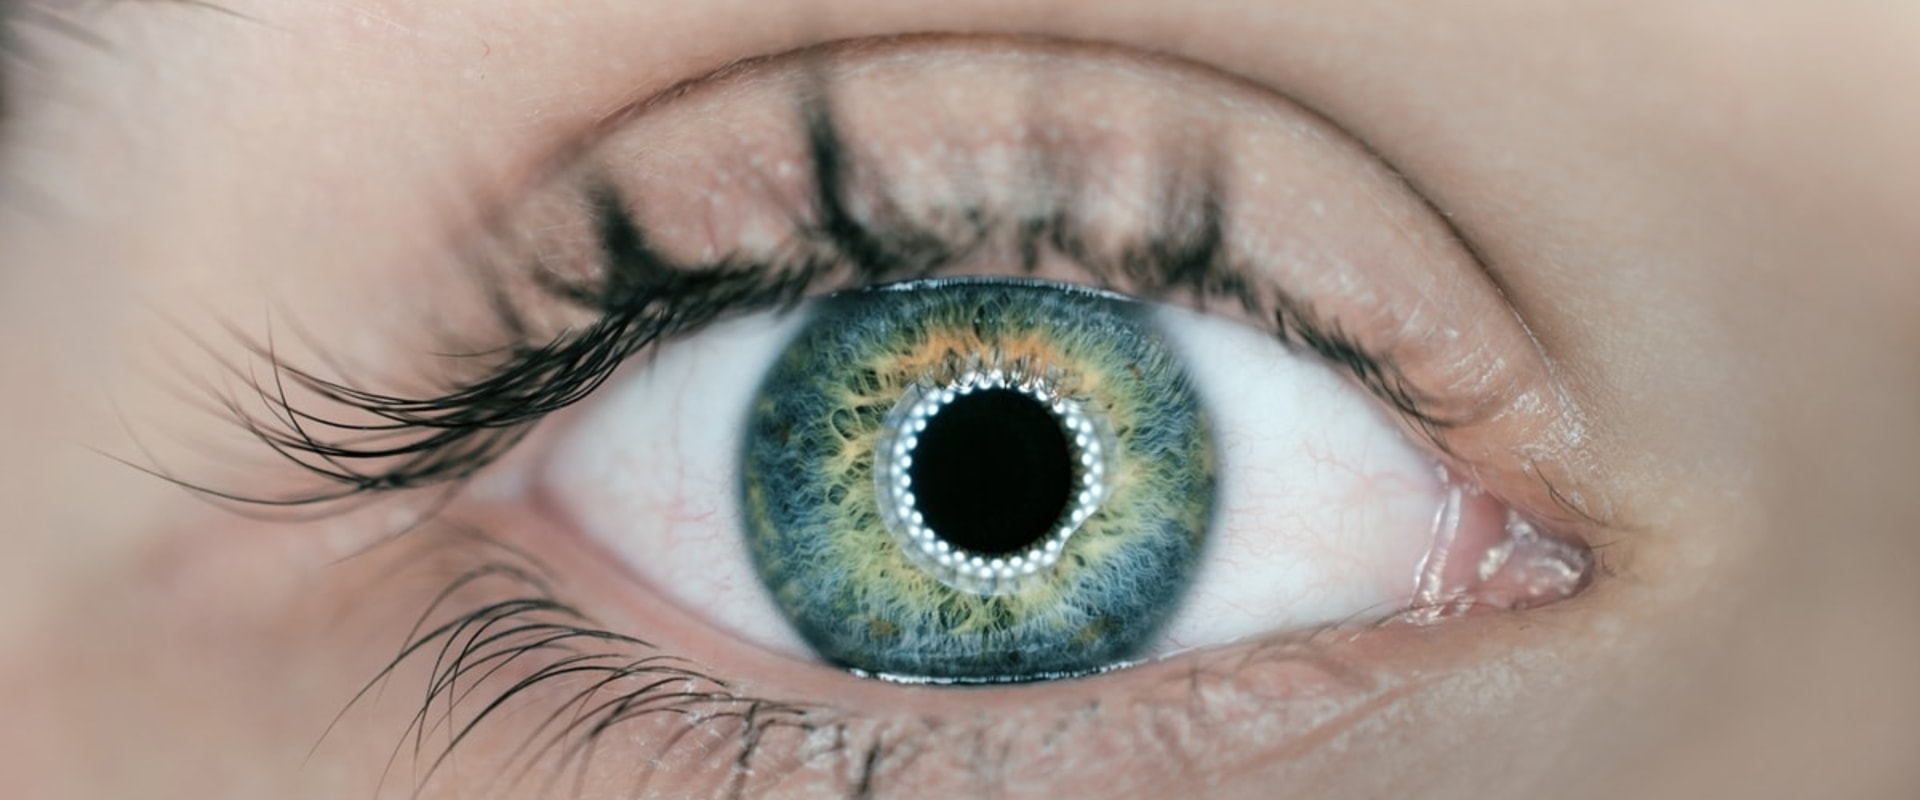 How Long Does Night Blindness Last After LASIK Surgery?